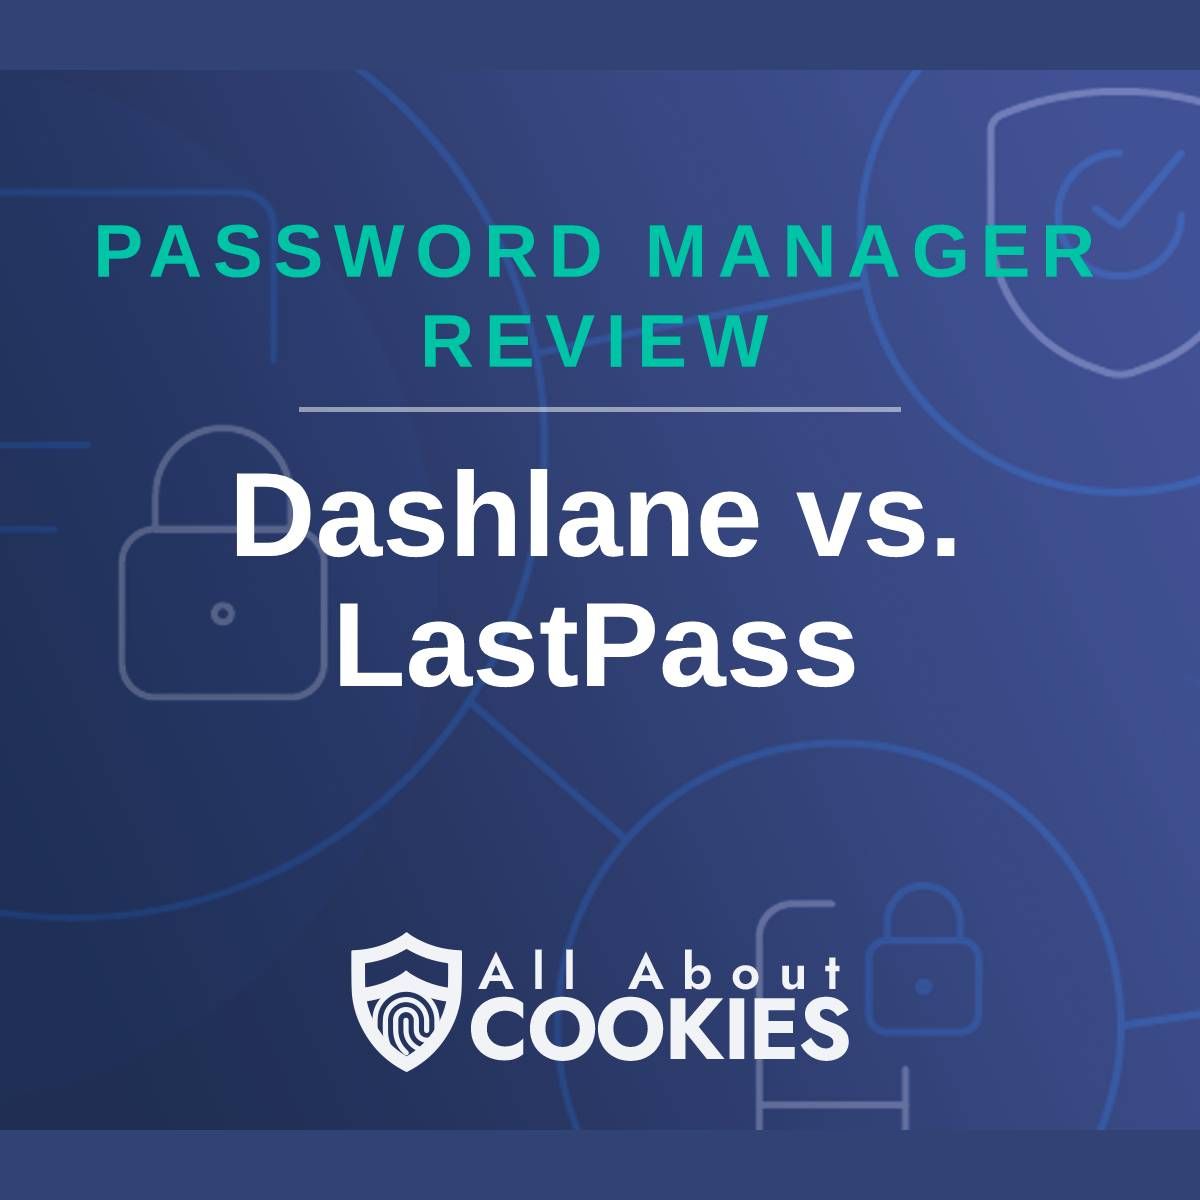 A blue background with images of locks and shields with the text &quot;Password Manager Review Dashlane vs. LastPass&quot; and the All About Cookies logo. 